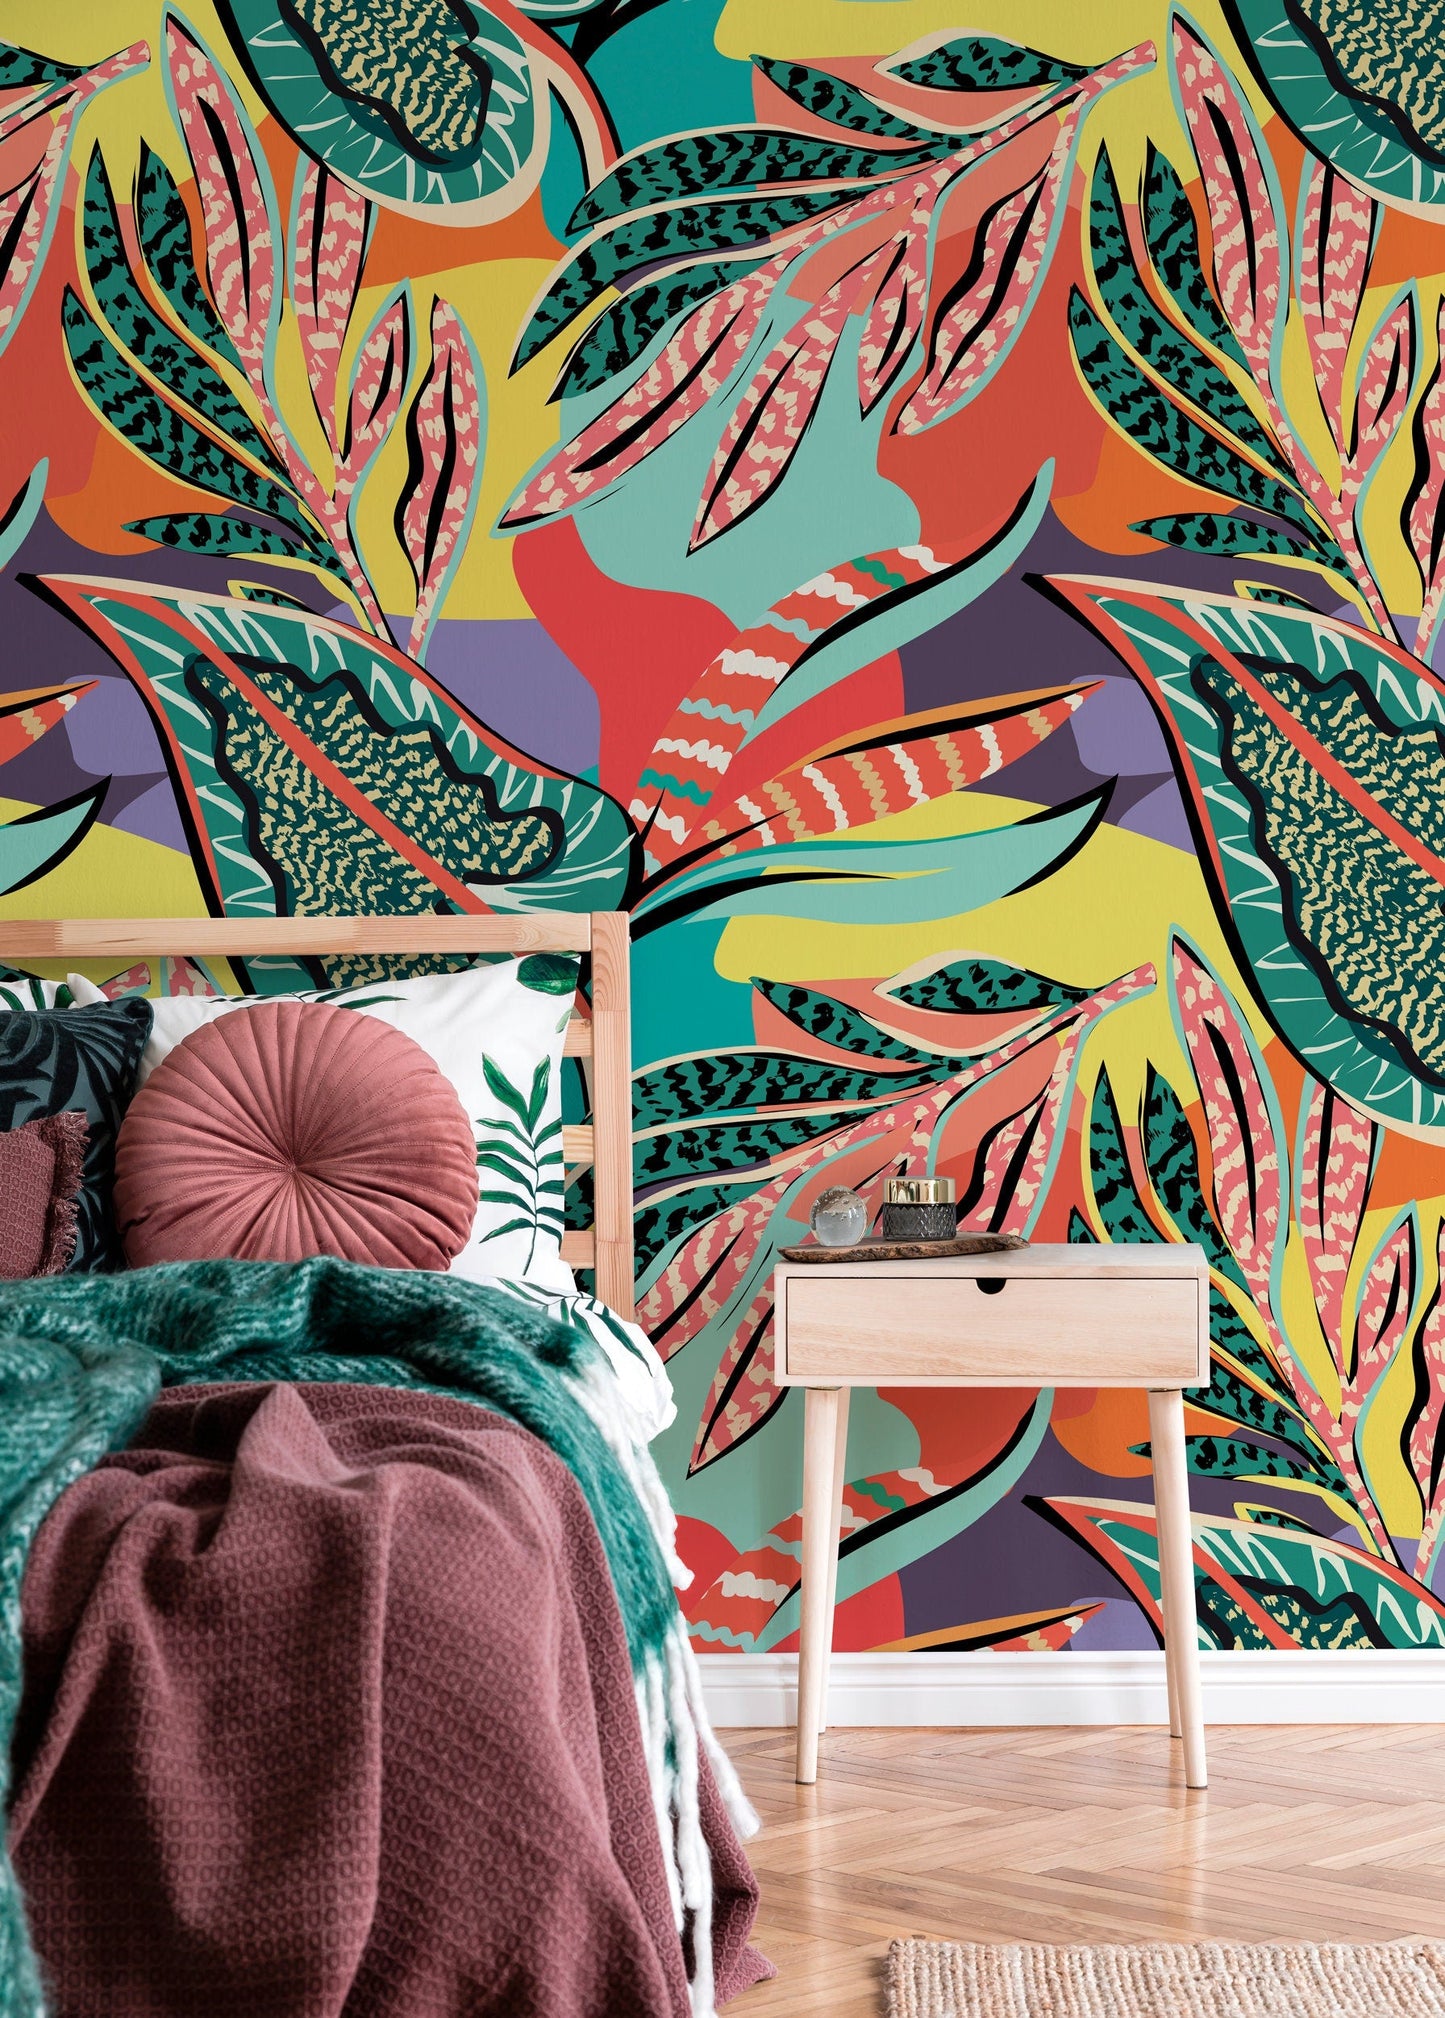 Wallpaper Peel and Stick Wallpaper Removable Wallpaper Home Decor Wall Art Wall Decor Room Decor / Colorful Abstract Leaves Wallpaper - C426